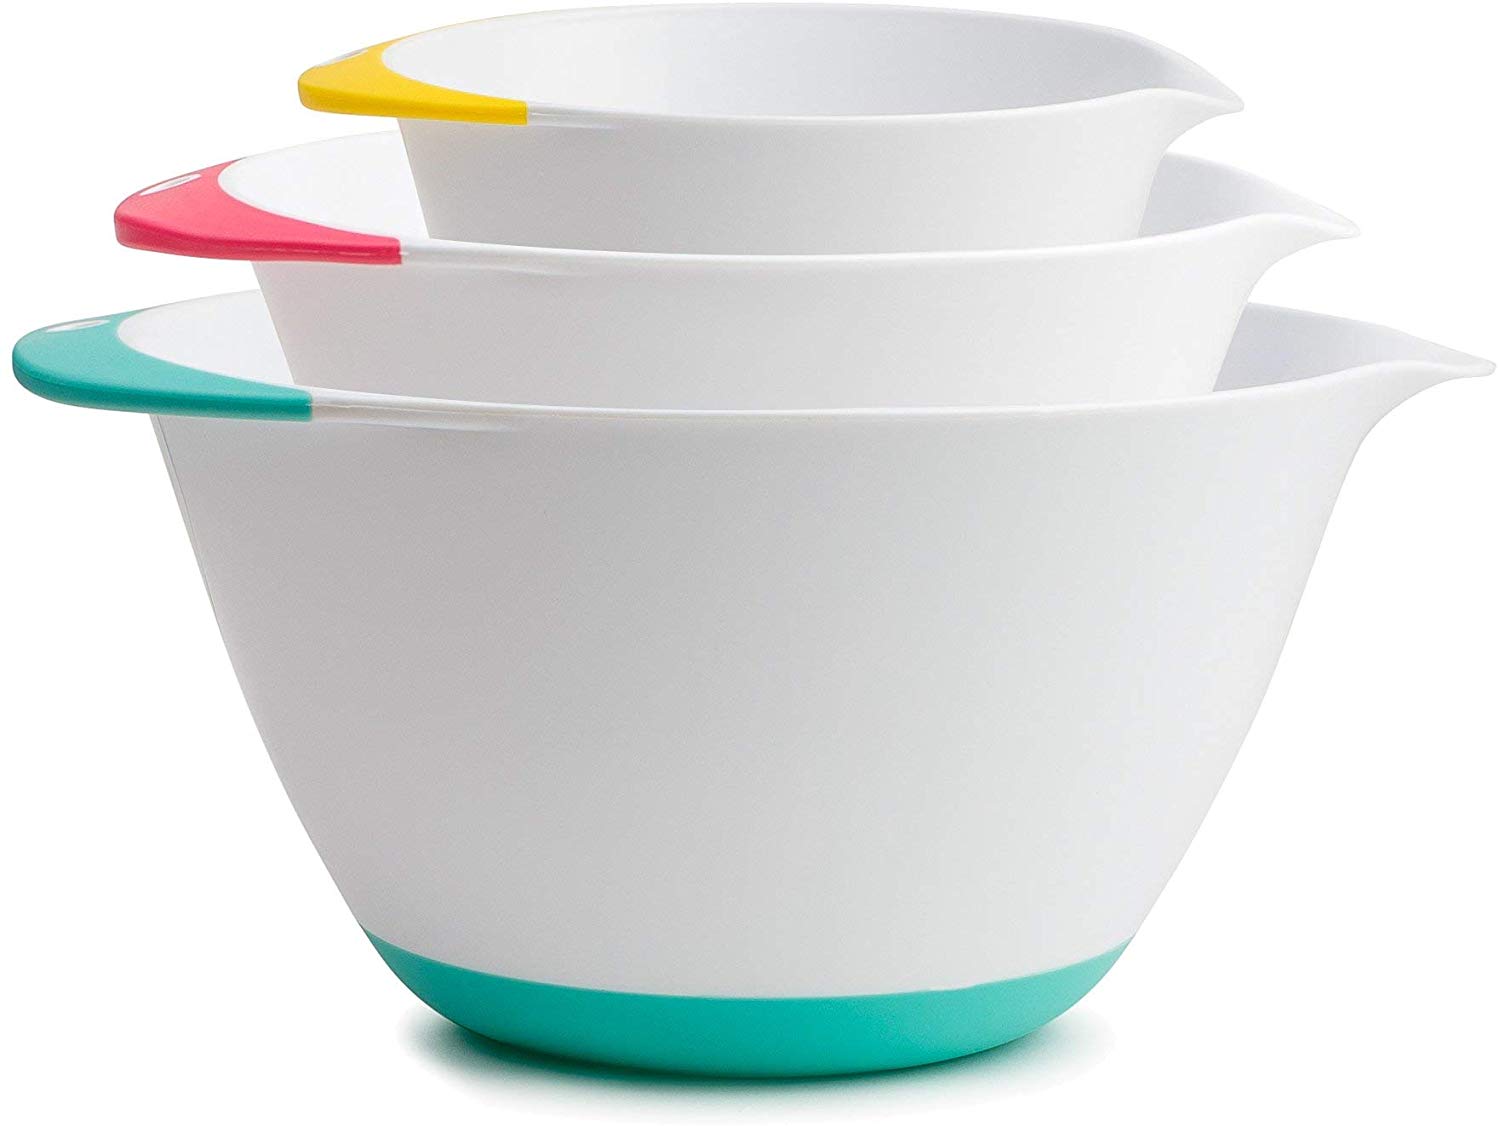 https://www.dontwasteyourmoney.com/wp-content/uploads/2019/11/kukpo-mixing-bowls-3-piece-set-includes-1-8-qt-3-6-qt-6-5-qt-easy-grip-handle-with-non-skid-bottom-mixing-bowl.jpg